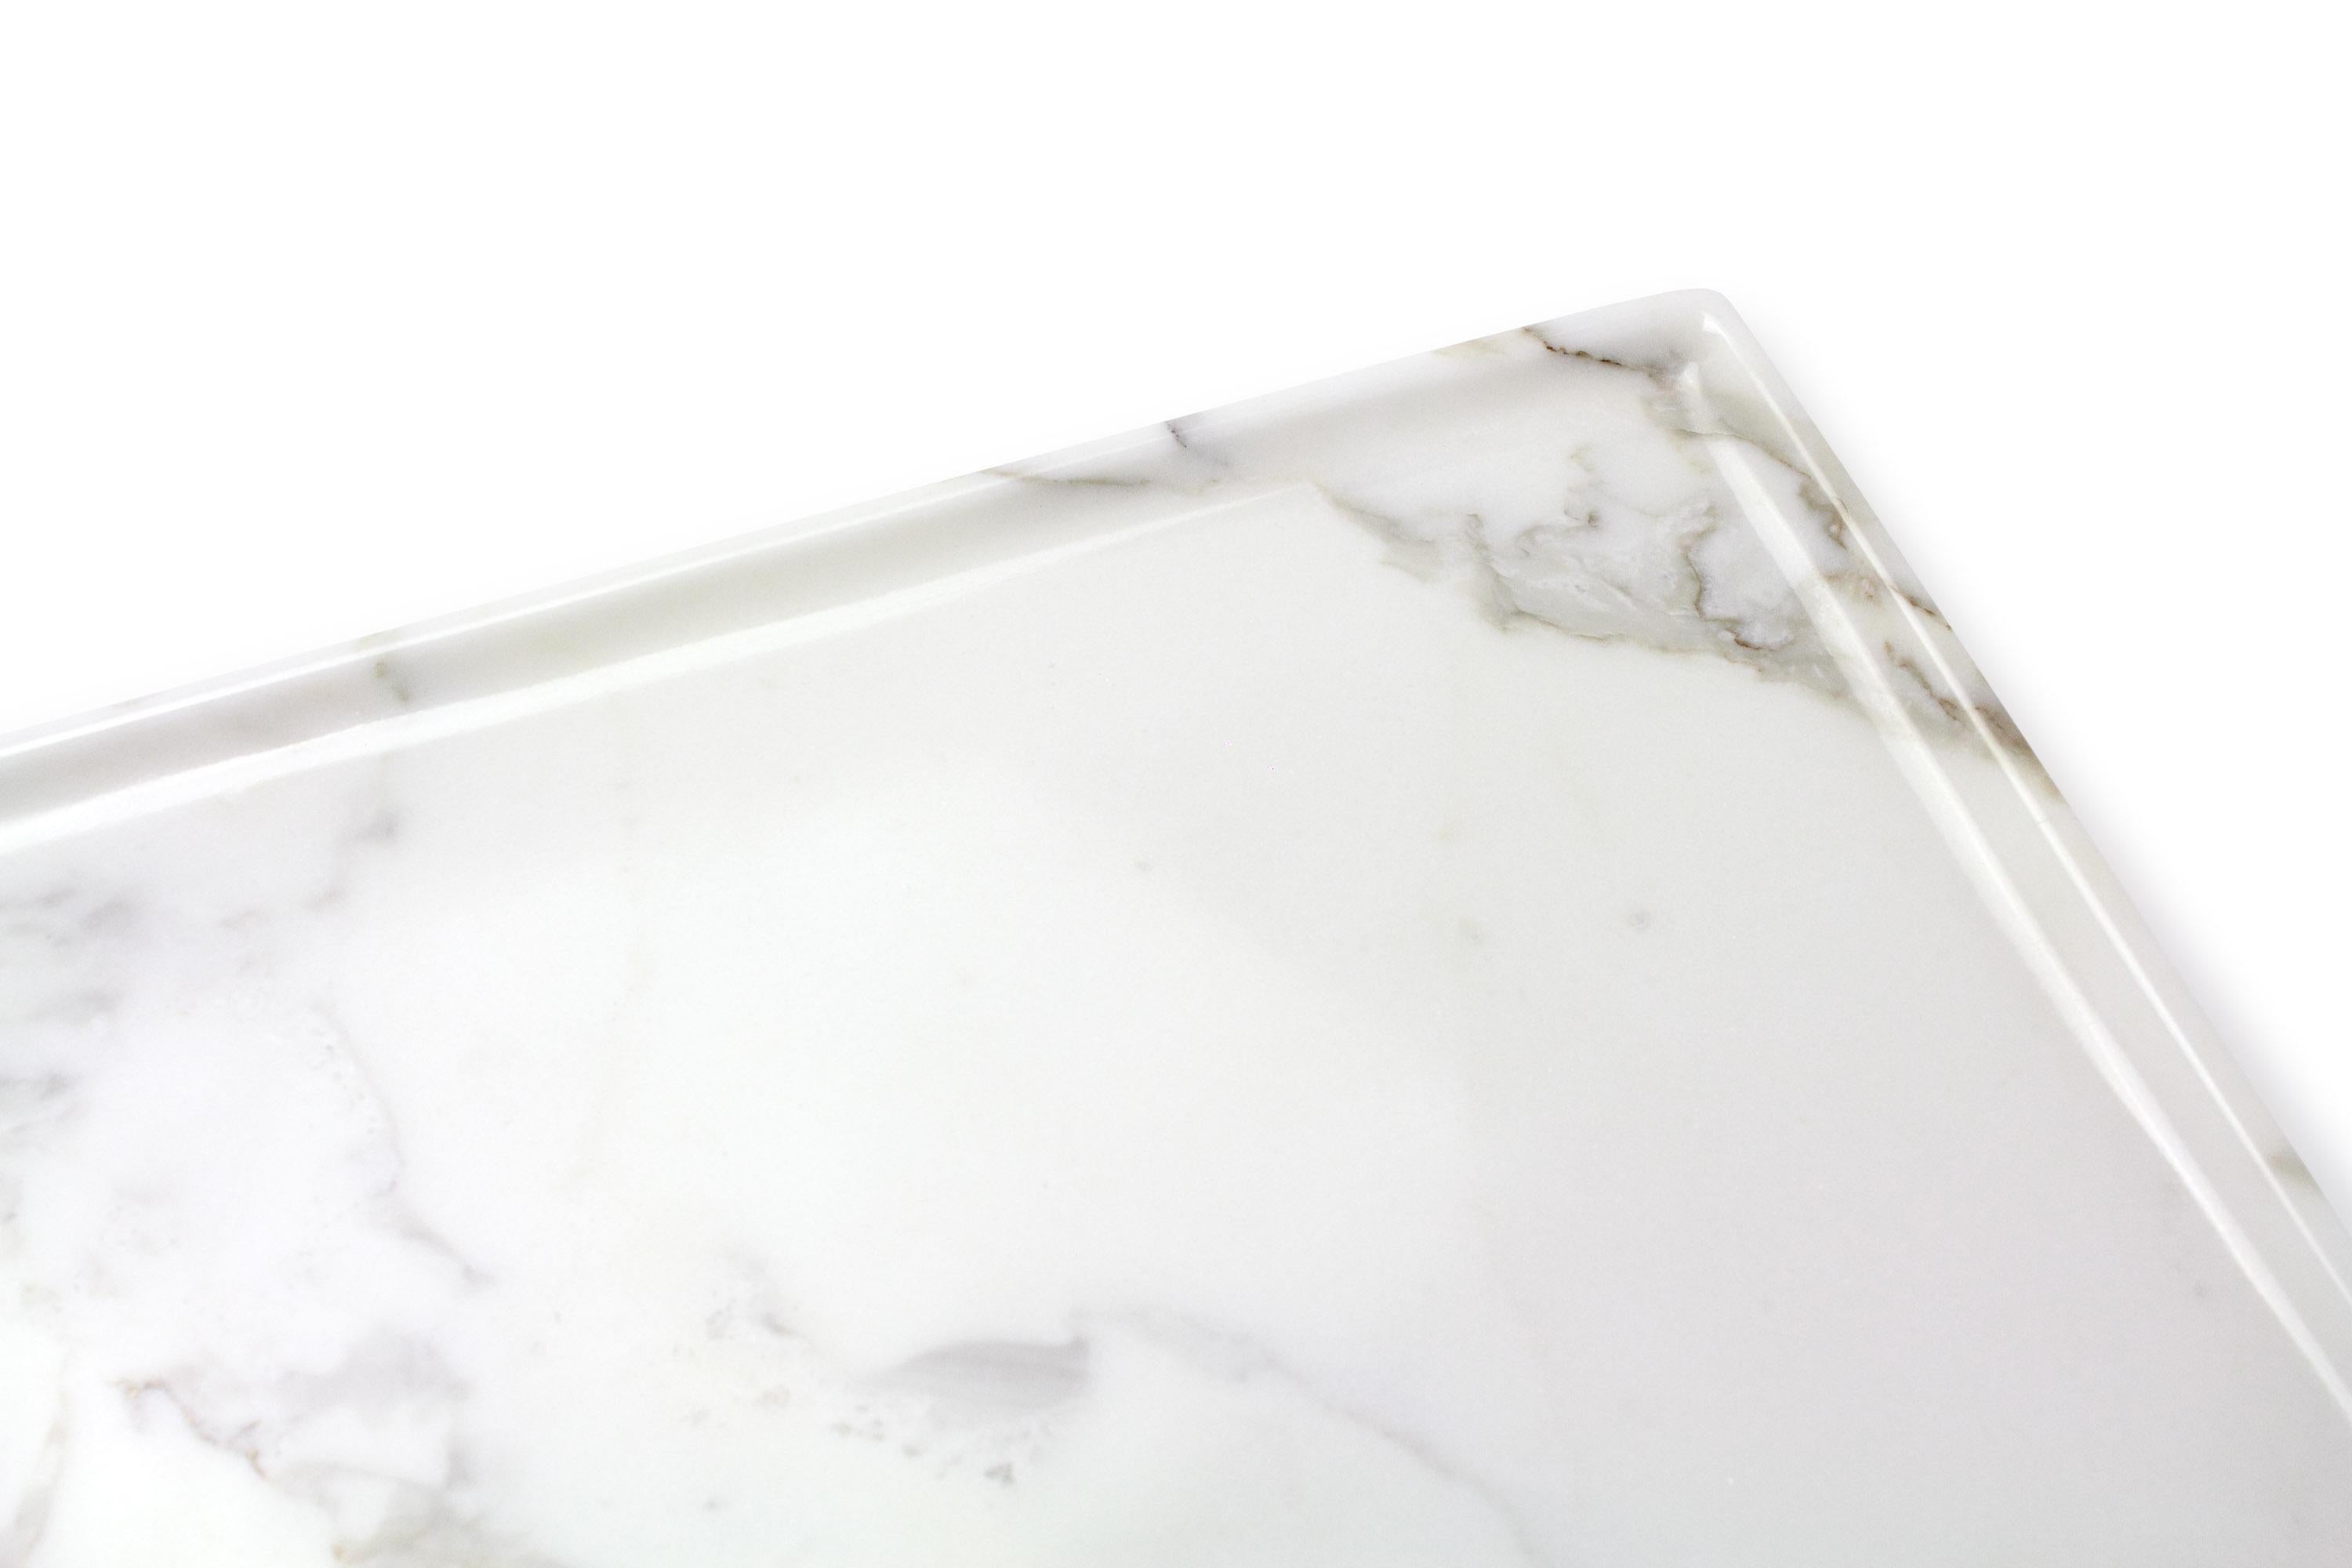 Italian Tray Hand Carved from Solid Block of White Marble, Rectangular, Made in Italy For Sale